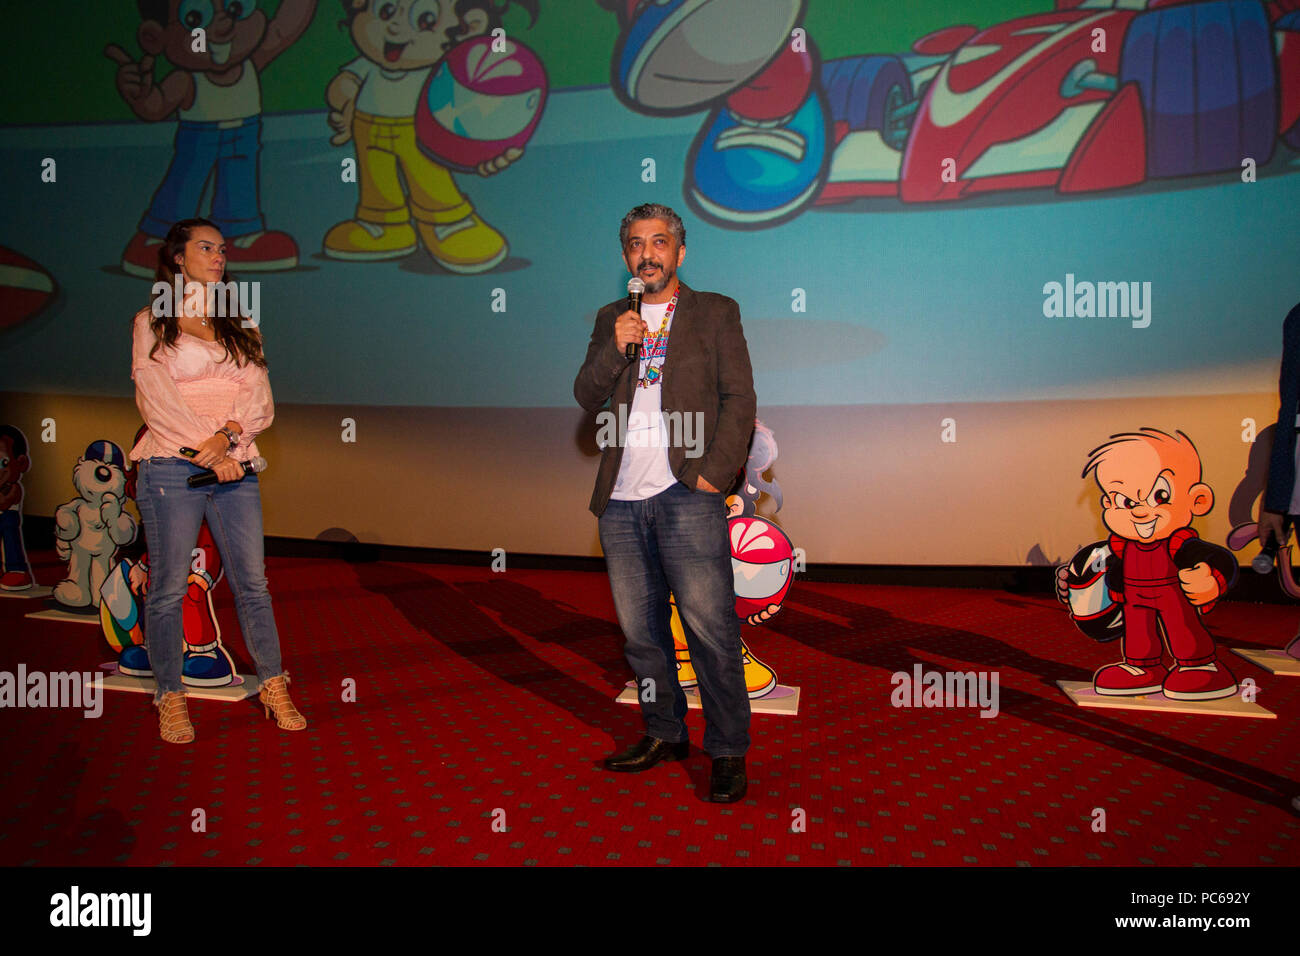 SÃO PAULO, SP - 31.07.2018: ANIMAÇÃO DO SENNINHA É LANÇADA EM SP - This event was held on Tuesday (31) the launch event of the new animated series of the character Senninha that will premiere on 08/08 on Gloobat&#39;s Glat cat channel. The animation that is inspired by three-time Formula 1 champion Ayrton Senna is called &quot;Sena naa na Pista Maluca&quot; (&amotquot;Senninha na Pista Malamp;quot;), which has 26 episodes, each withwith 11 minutes, which wbe shown dai daily at various times. No highlight is Bianca Senna, director of branding of the Ayrton Senna Institute and niece of the pilot Stock Photo